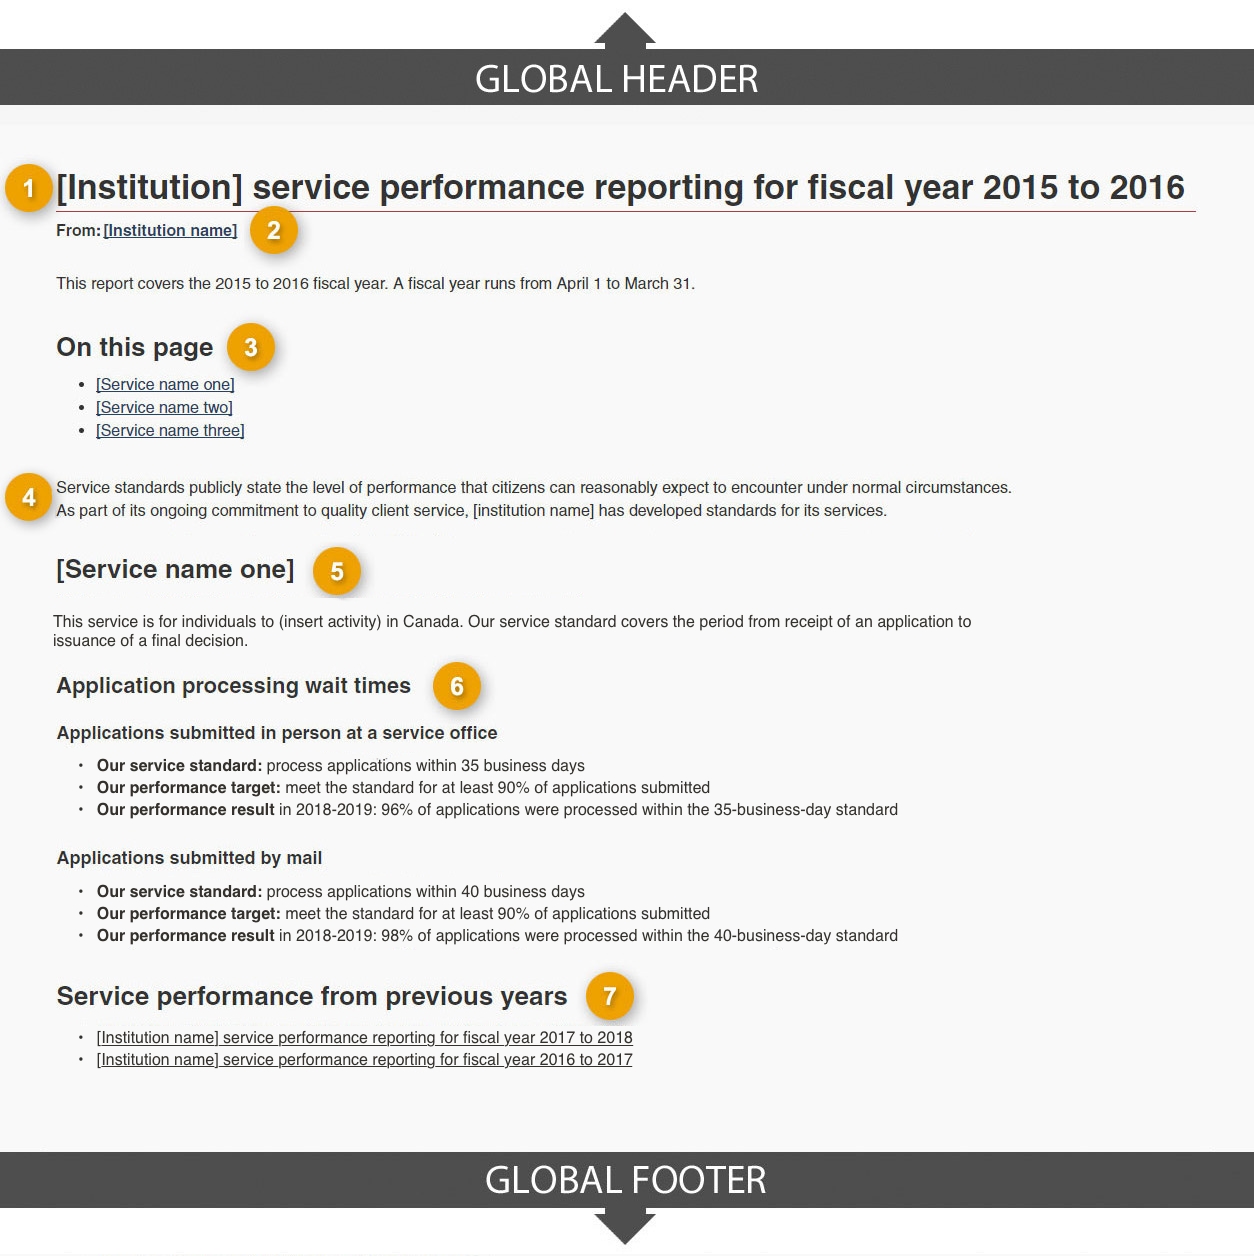 Template of institutional service performance reporting page showing sections that make up its structure. Read top to bottom and left to right. Specifications detailed below.